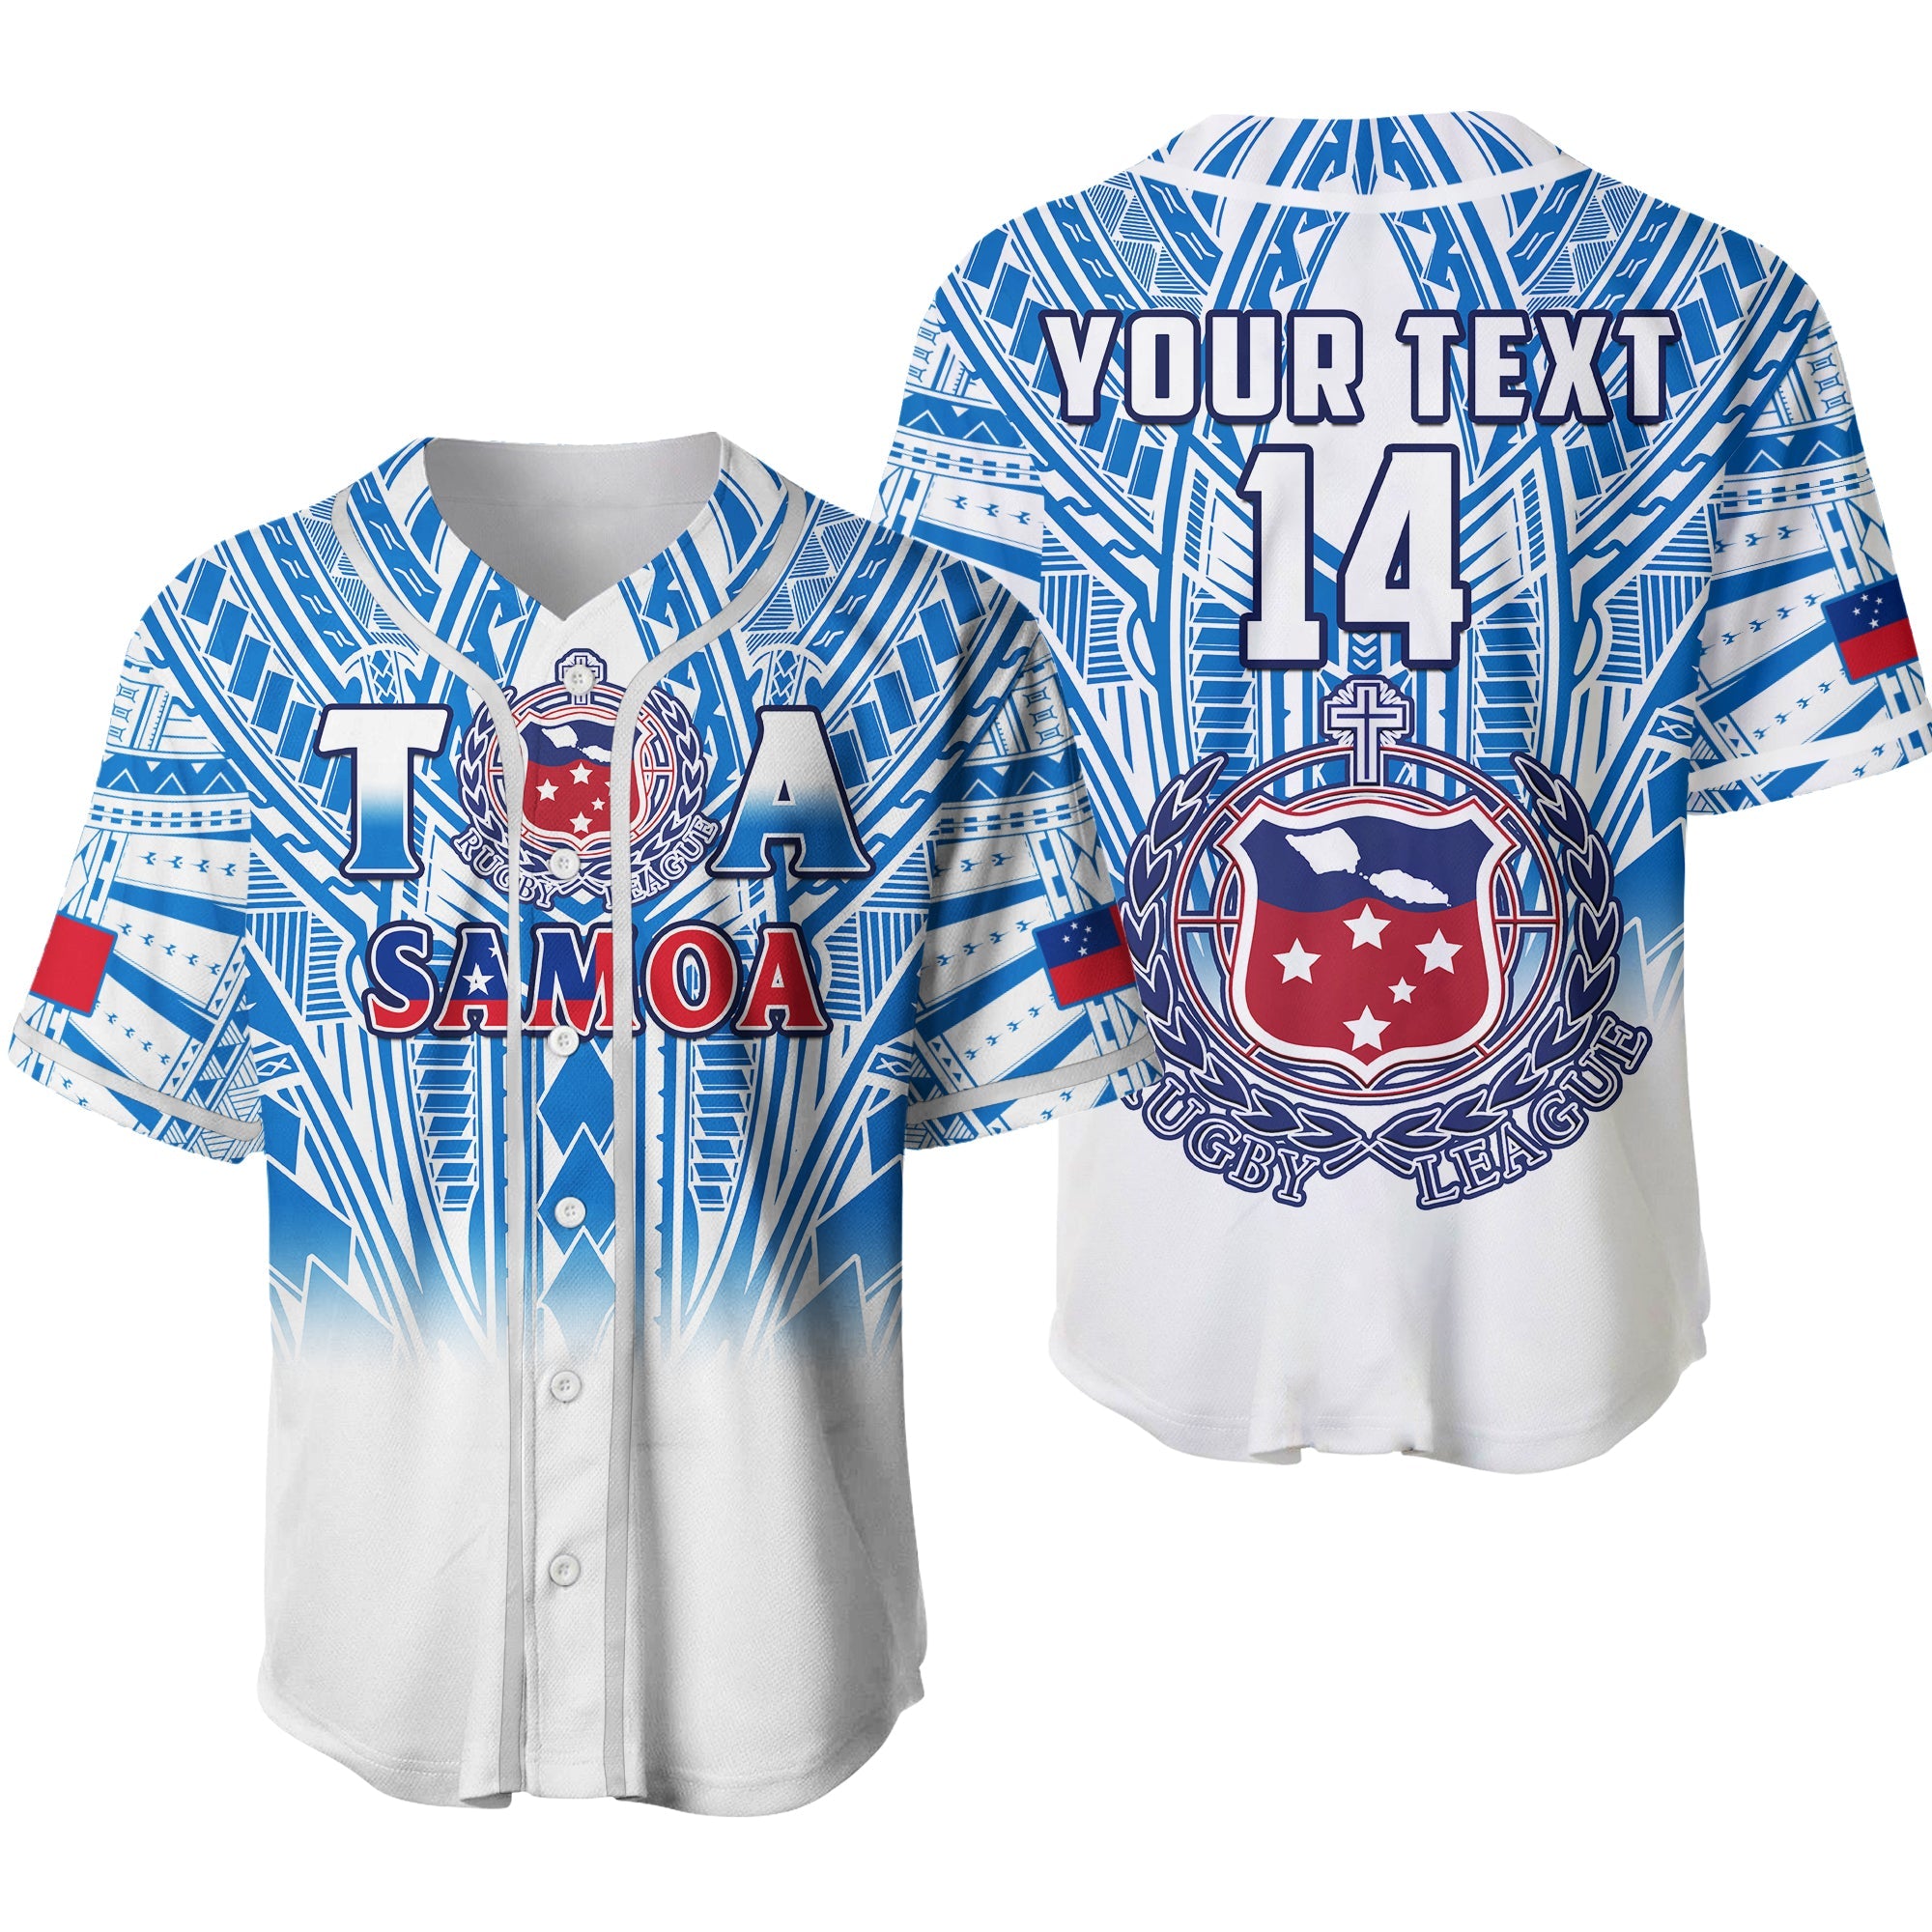 (Custom Text And Number) Samoa Rugby Baseball Jersey Personalise Toa Samoa Polynesian Pacific White Version Ver.02 LT14 White - Polynesian Pride